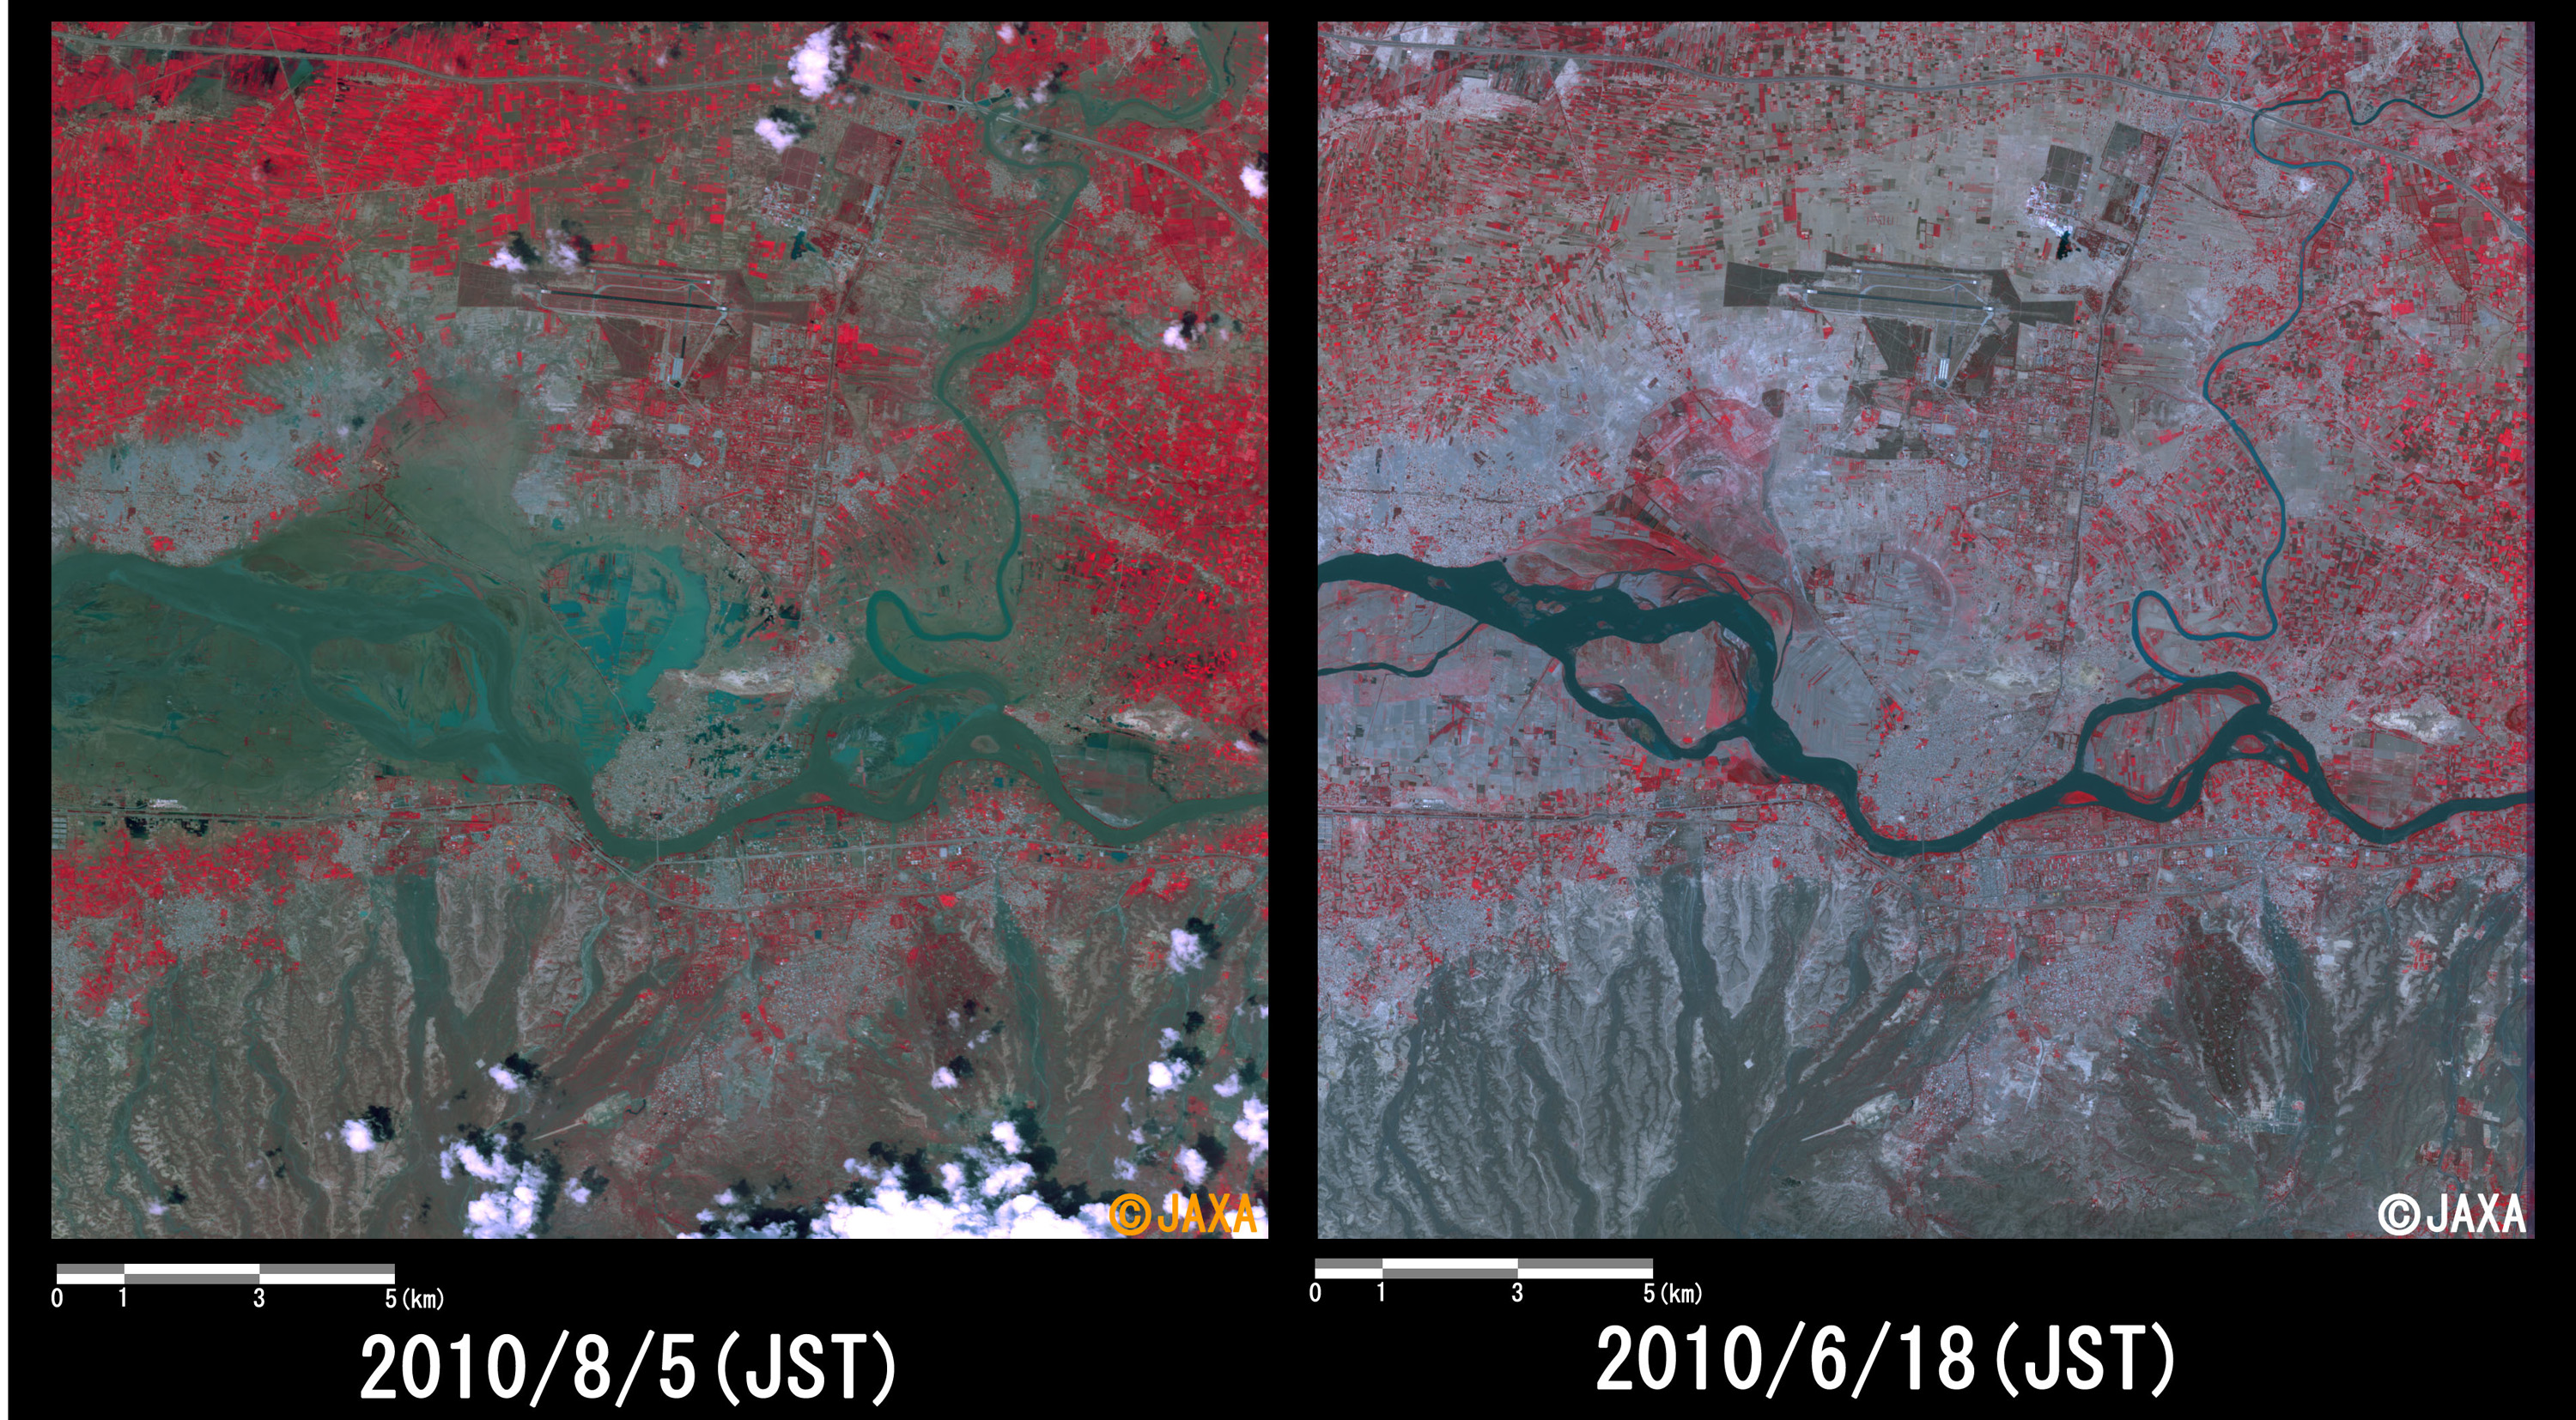 Fig. 4: Enlarged images of the swollen rivers in Nowshera District, Khyver Pakhtunkhwa Province (324 square kilometers, left: August 5, 2010; right: June 18, 2010).